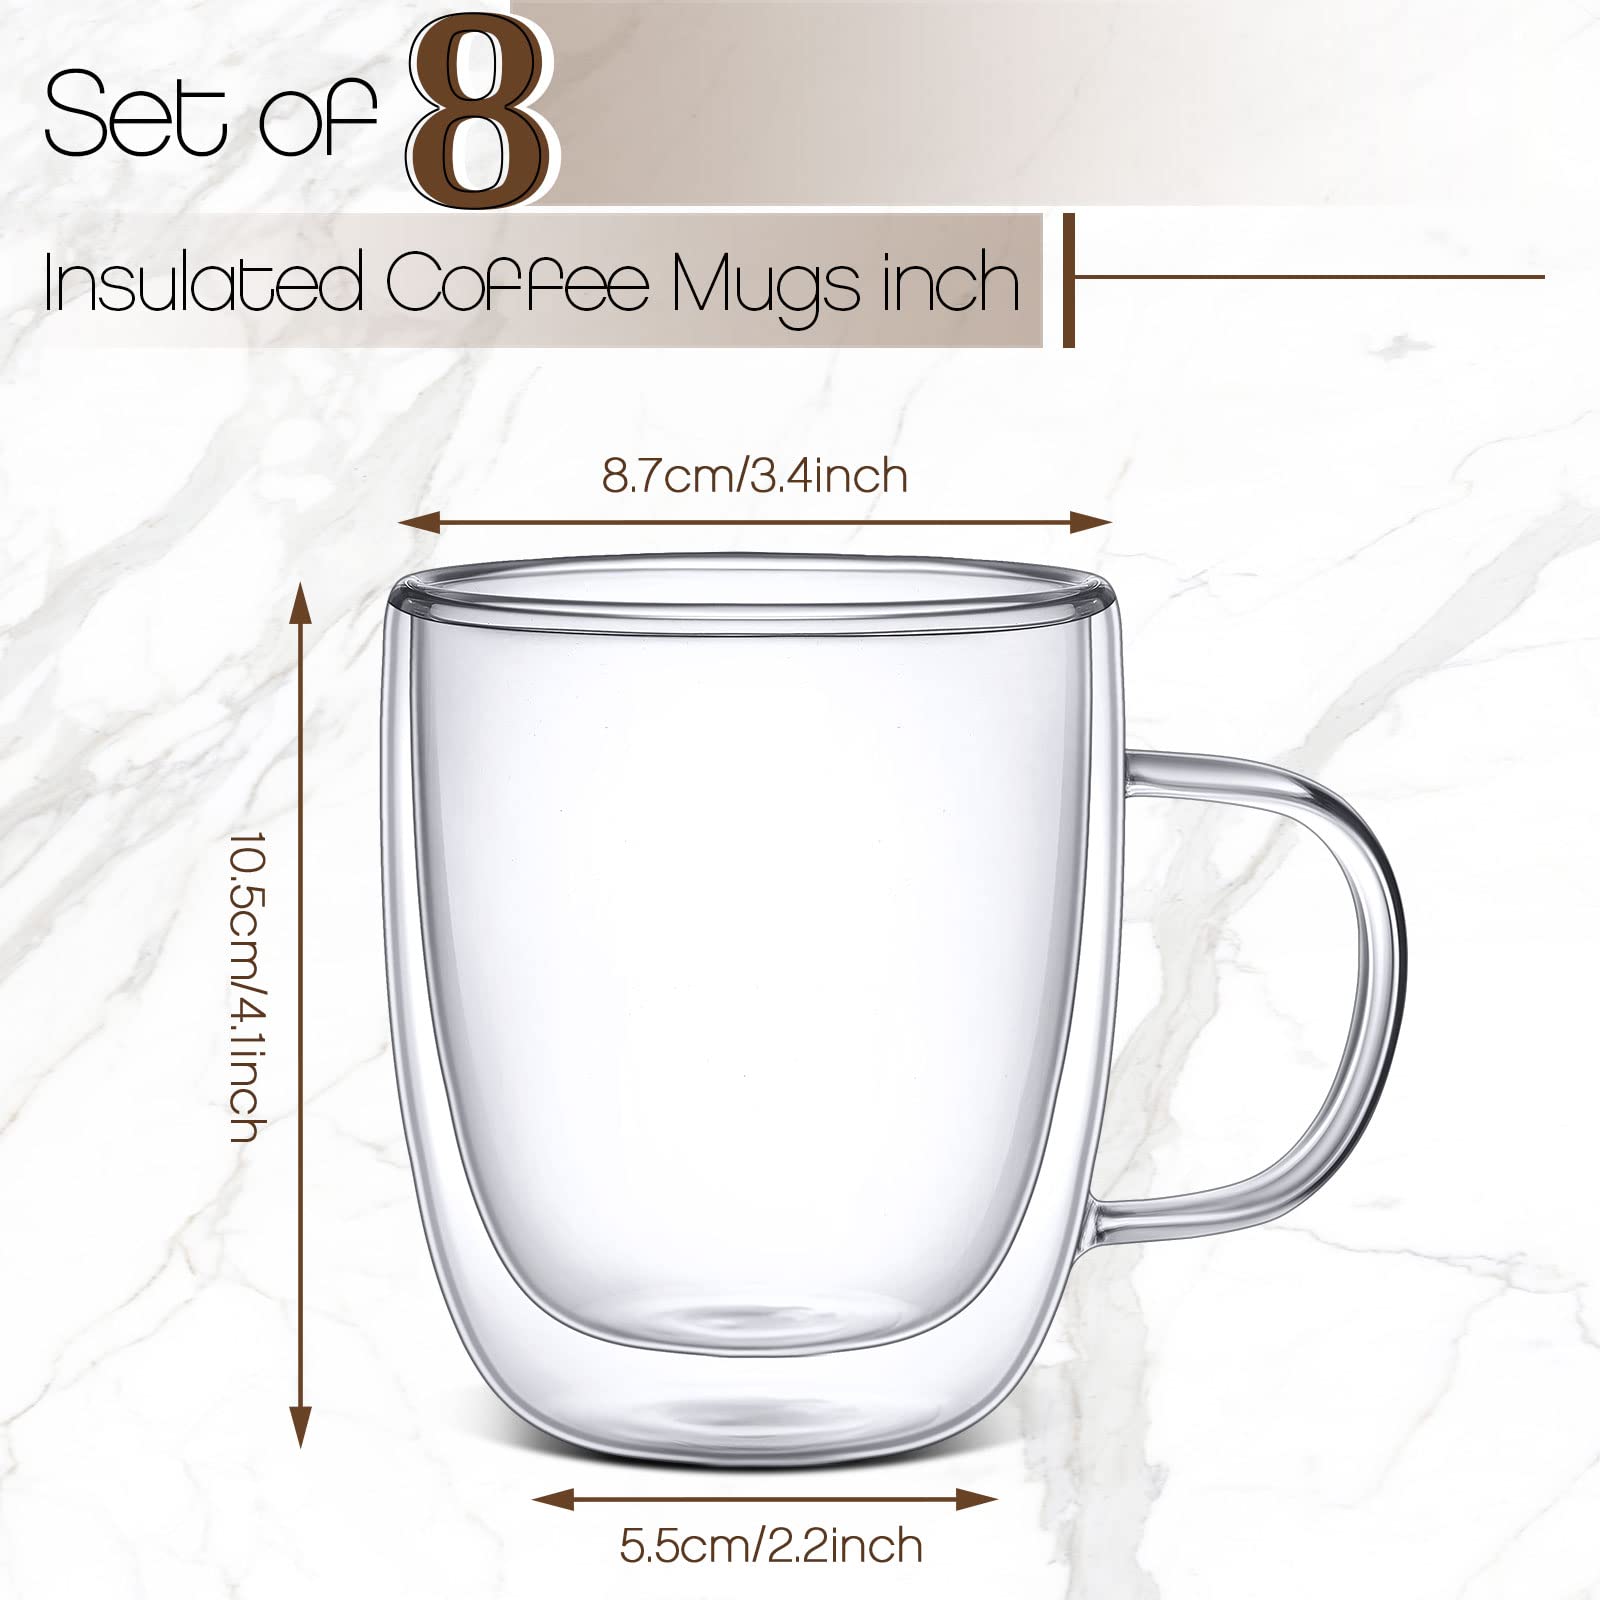 Gerrii 8 Pack 13.5 oz Double Walled Glass Coffee Mugs with Handle, Clear Glass Coffee Mugs Insulated Layer Coffee Cups Espresso Mug Cups for Cafe Latte Cappuccino Tea